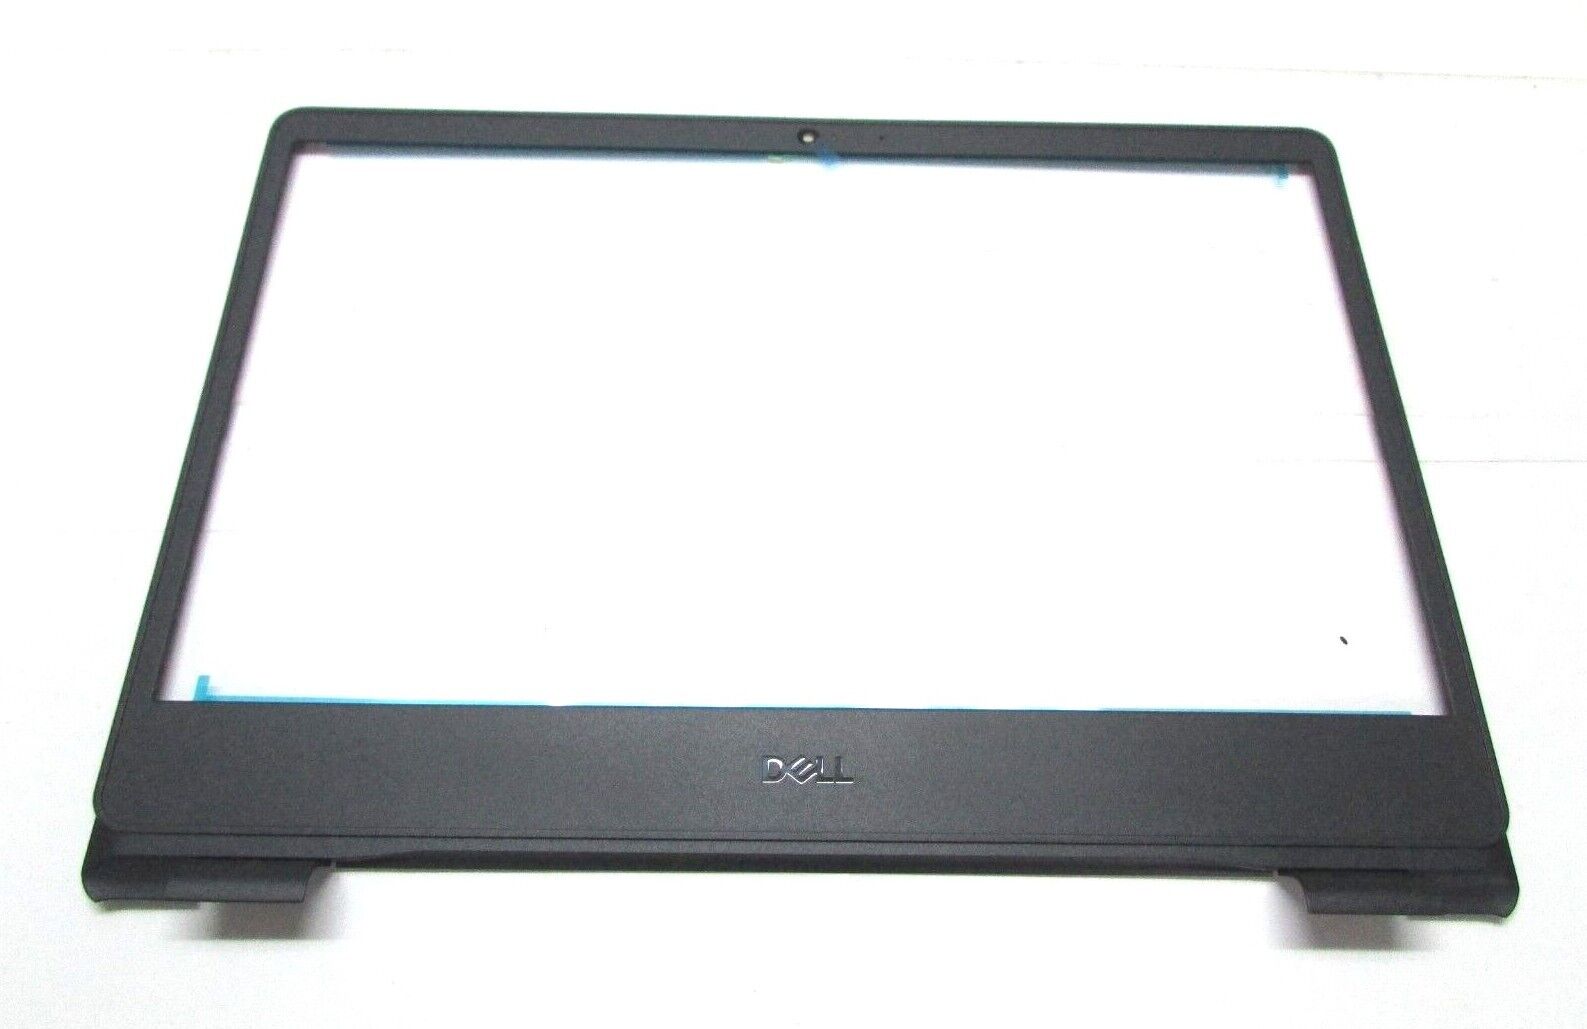 DELL VOSTRO 3401 14" LCD BORDE FRO NTAL BISEL PUERTO WC HUA01 125D6